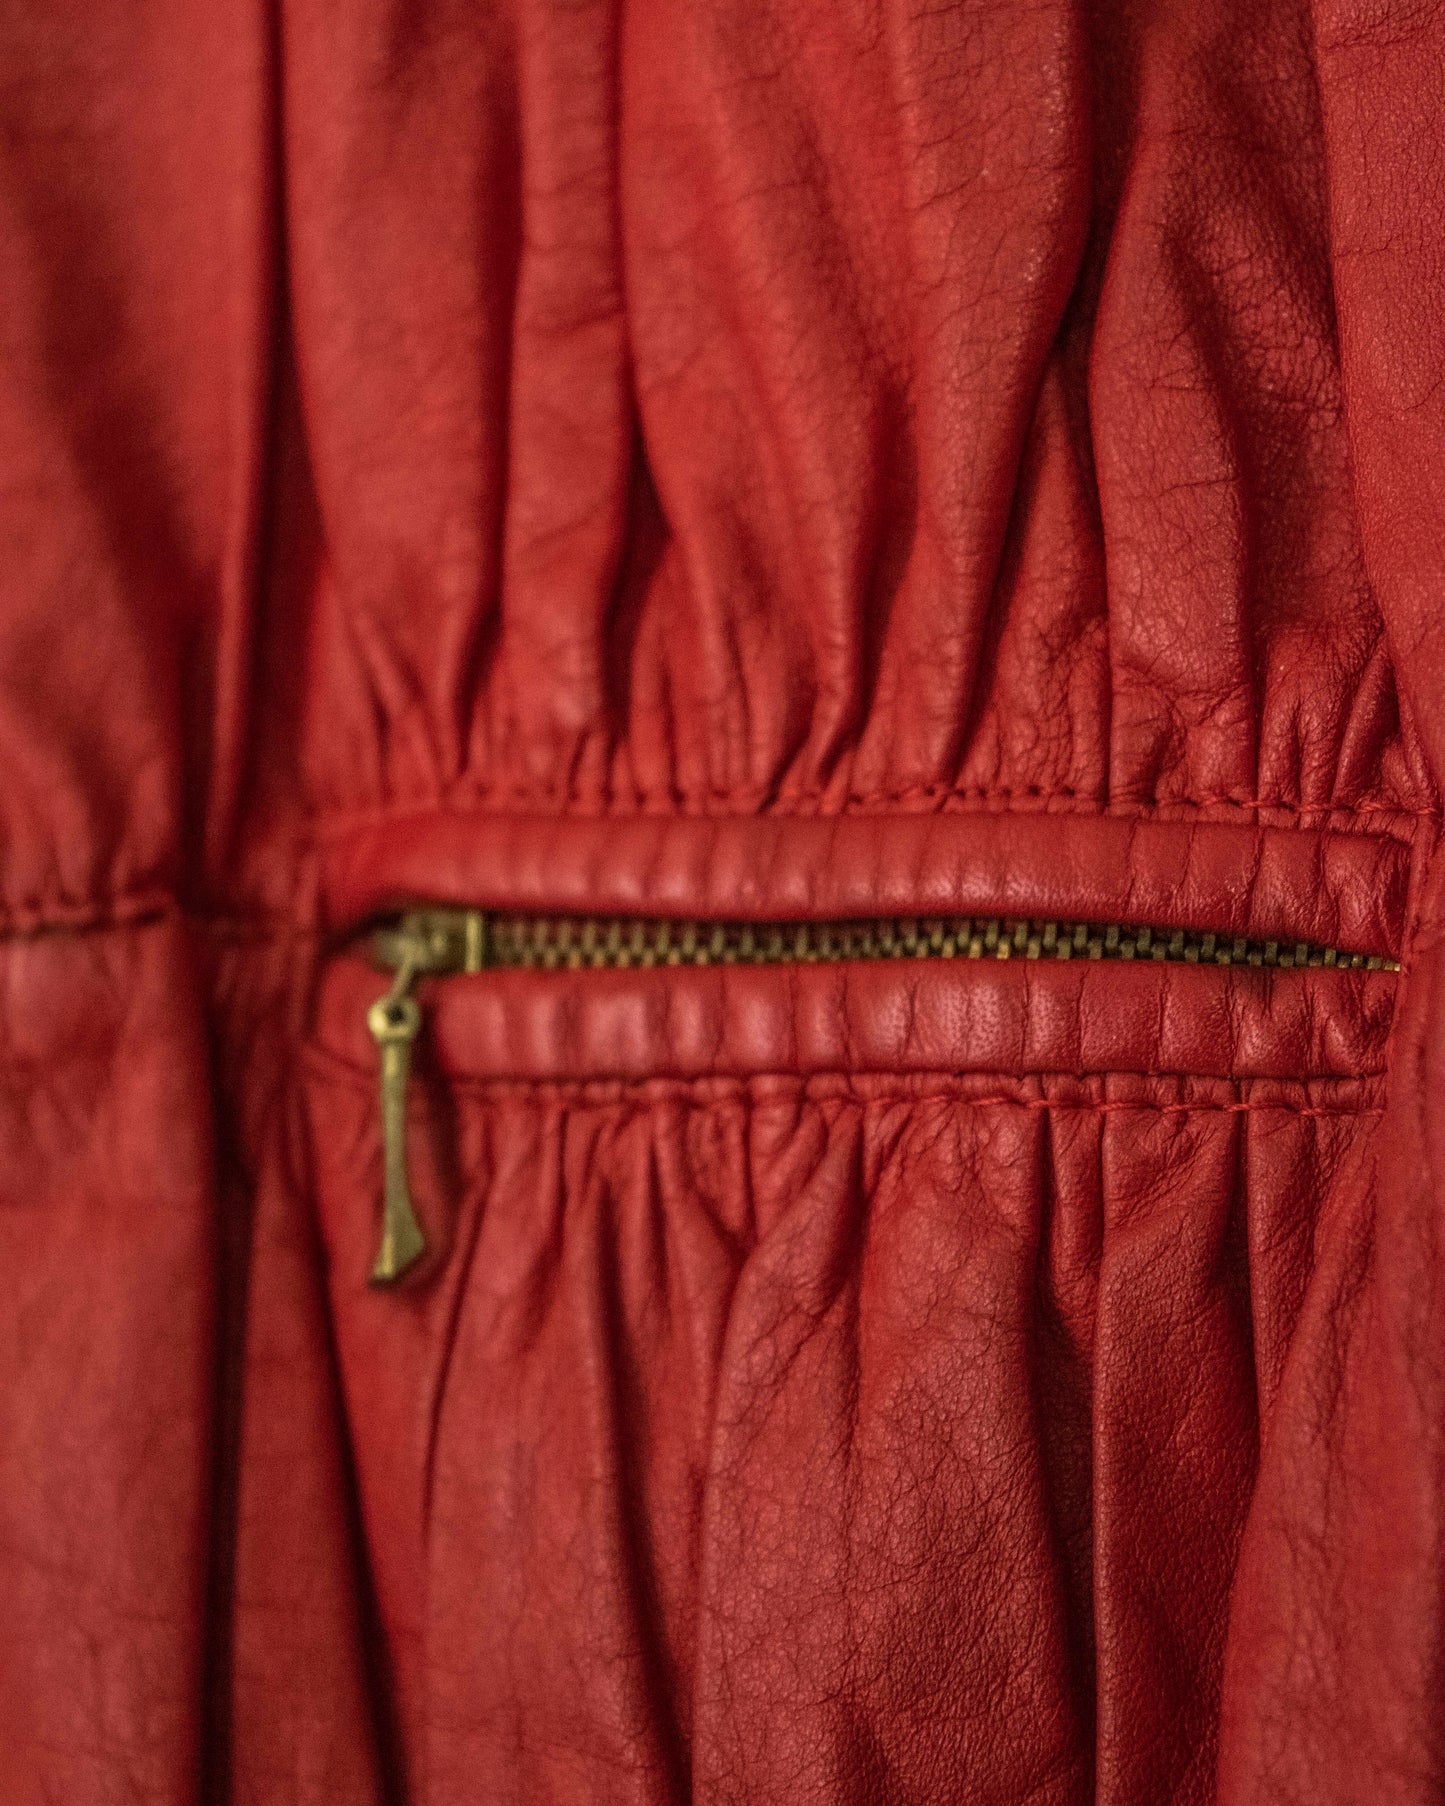 RUGGED RED LEATHER JACKET